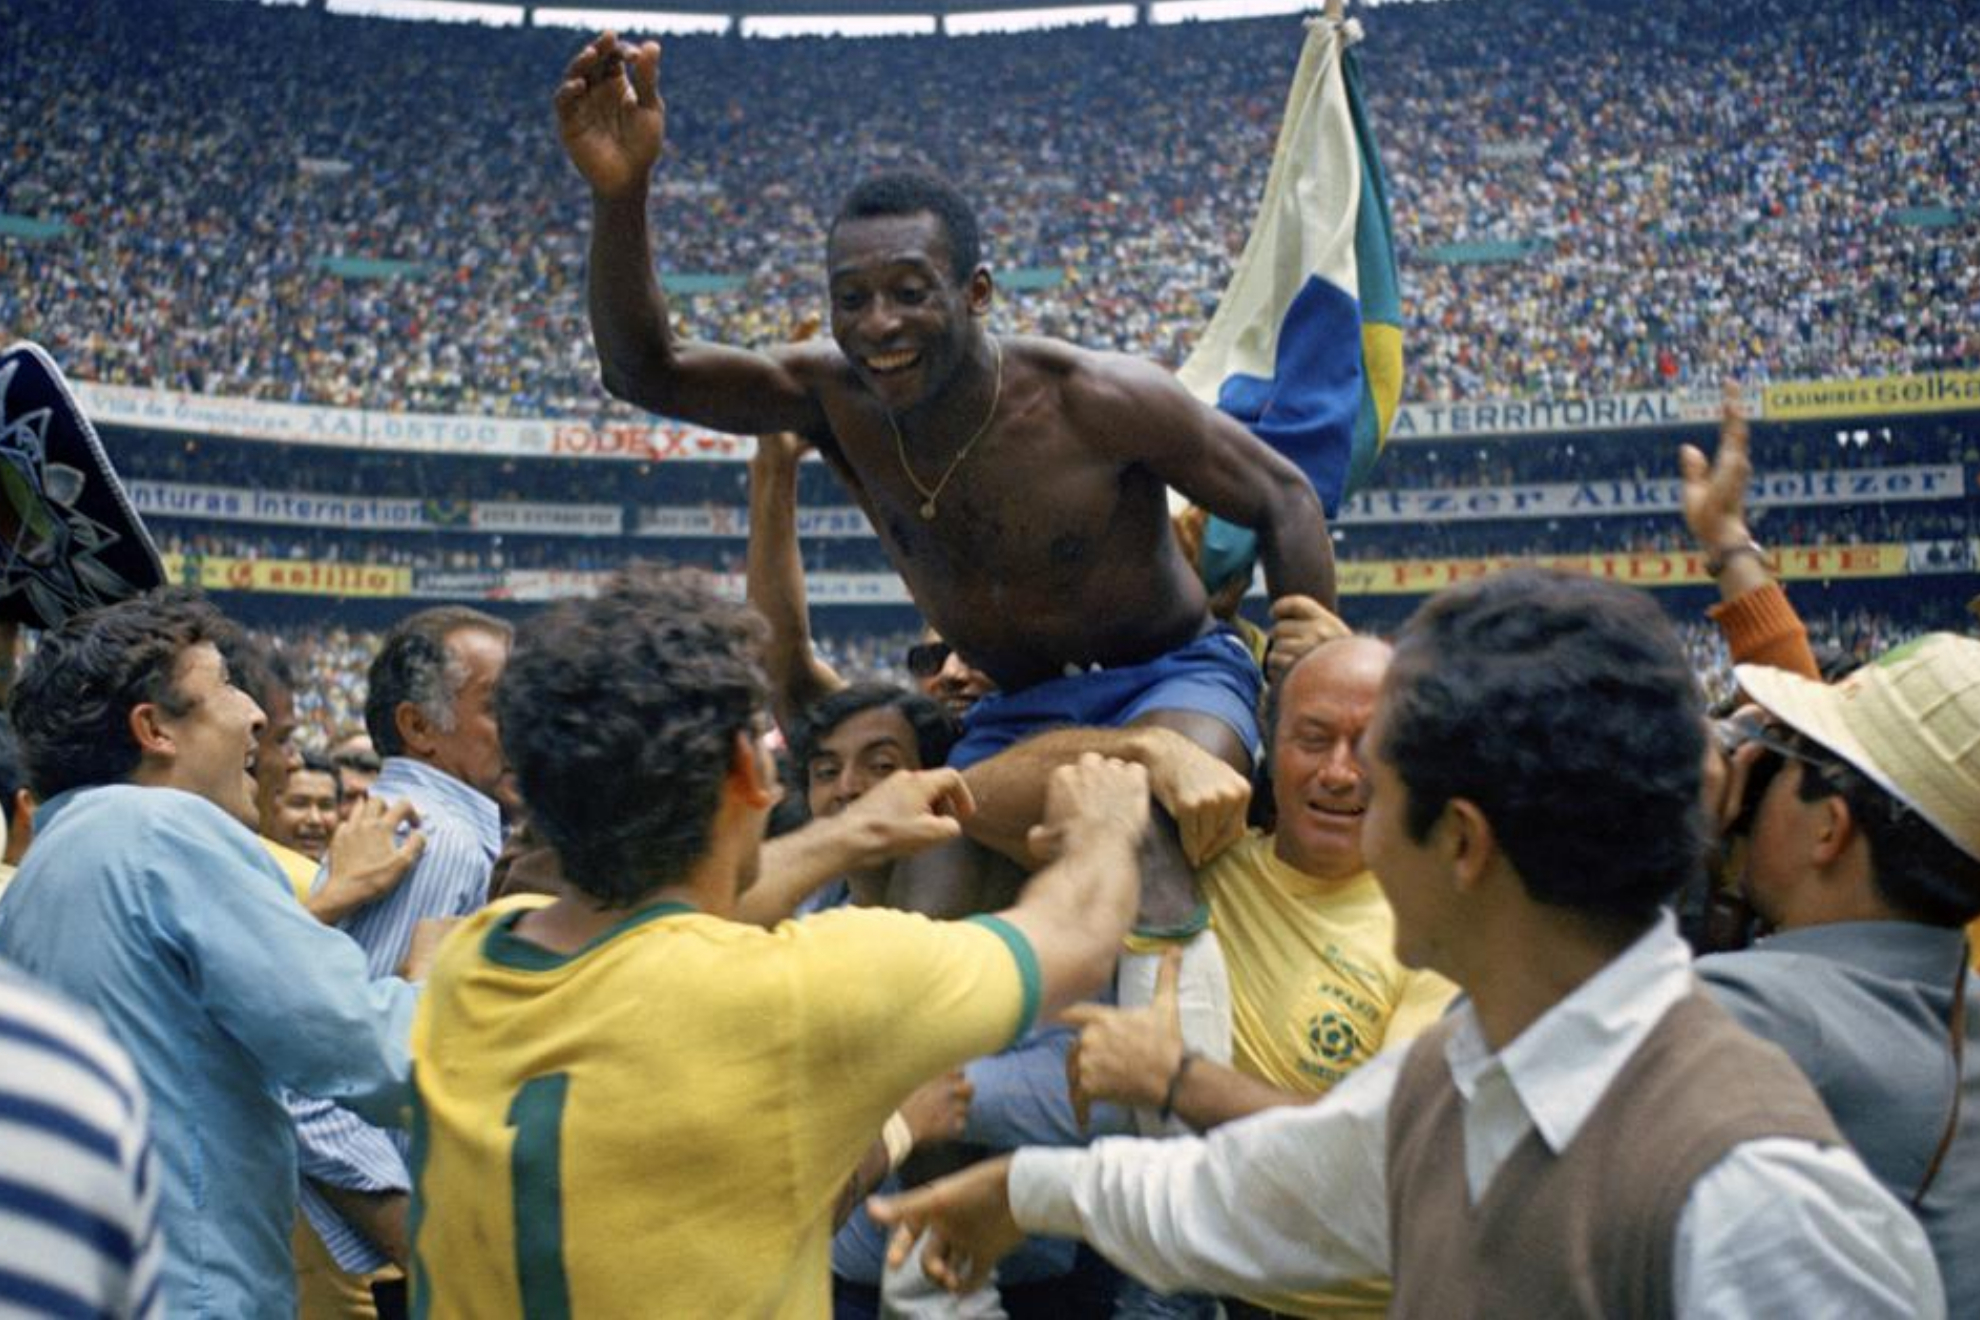 Pele is hoisted on shoulders after Brazil won the World Cup final against Italy, 4-1, in Mexico 1970.